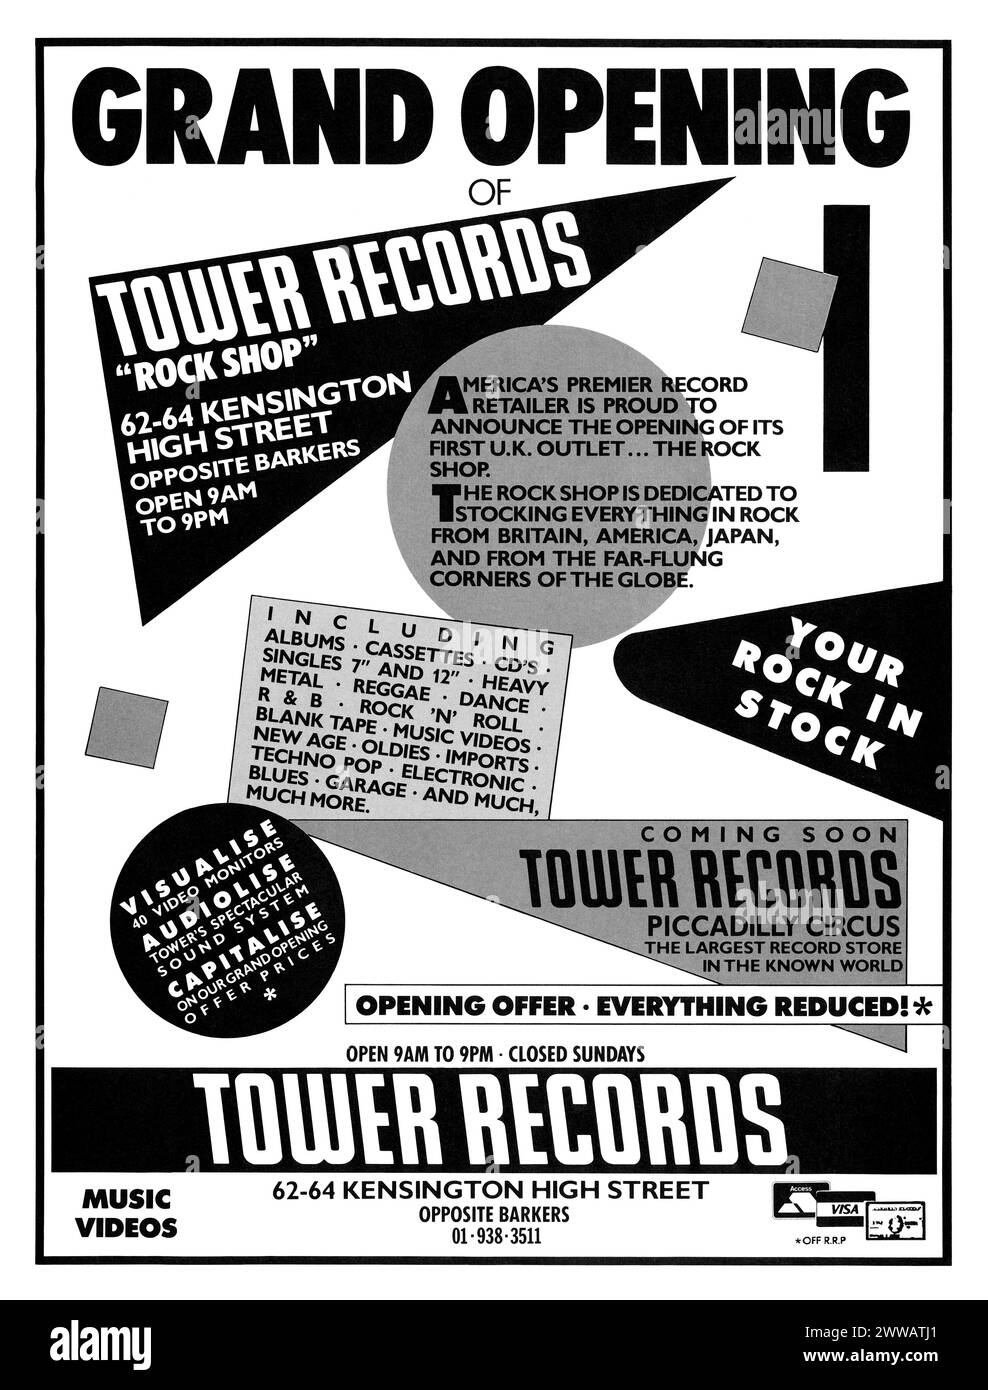 January 1986 British advertisement for the grand opening of the first UK branch of Tower Records in Kensington High Street, London. Stock Photo